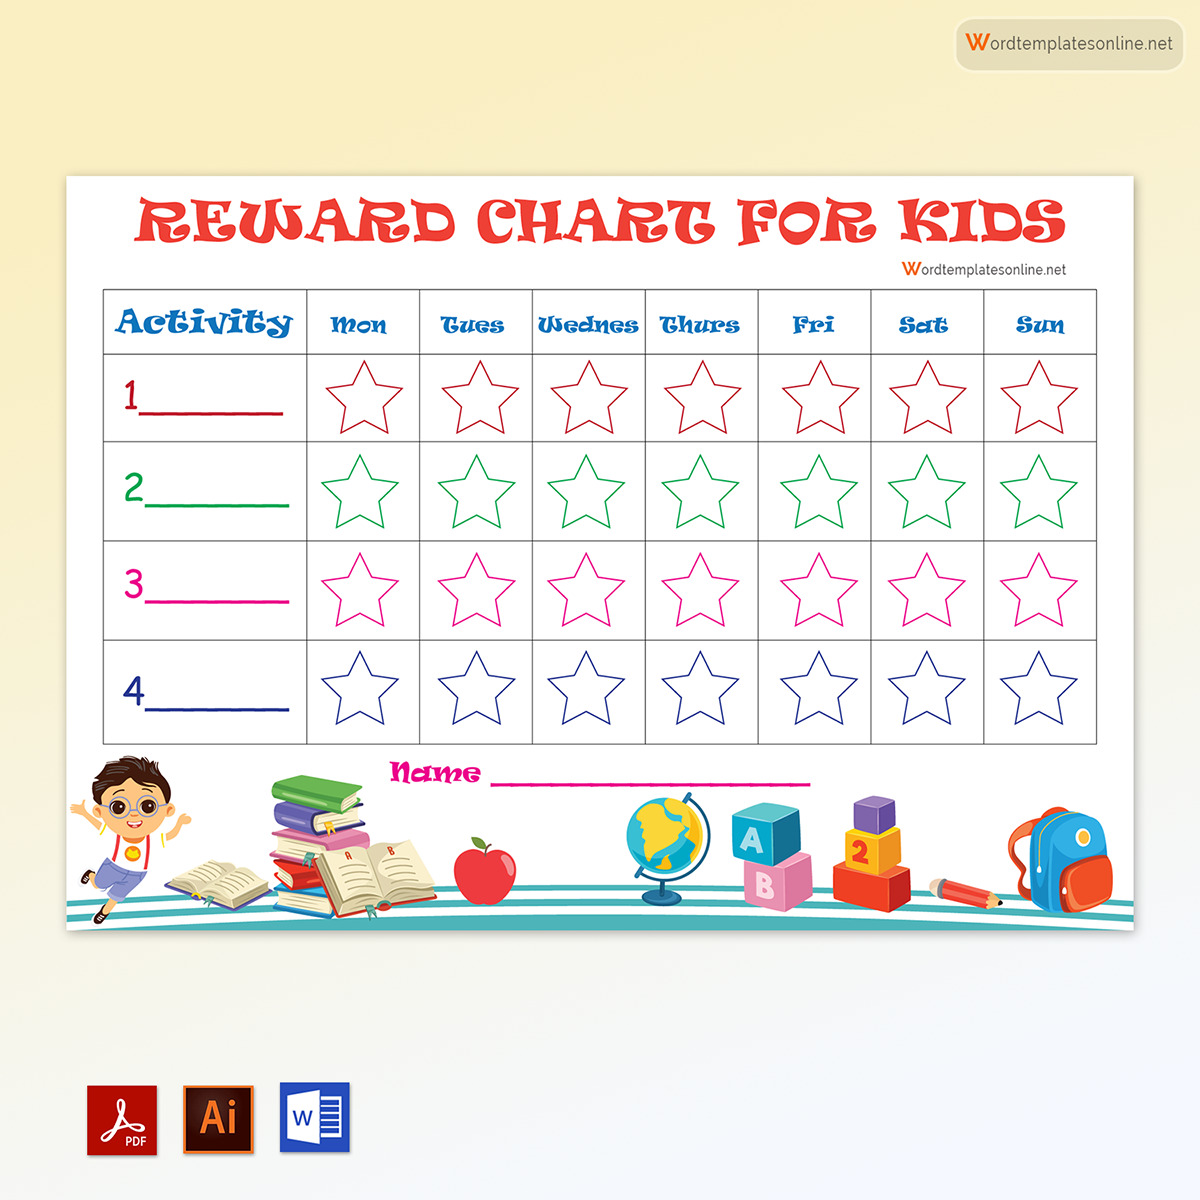 Great Printable Parenting Technique Reward Chart for Kids Template 02 in Word and Adobe Format